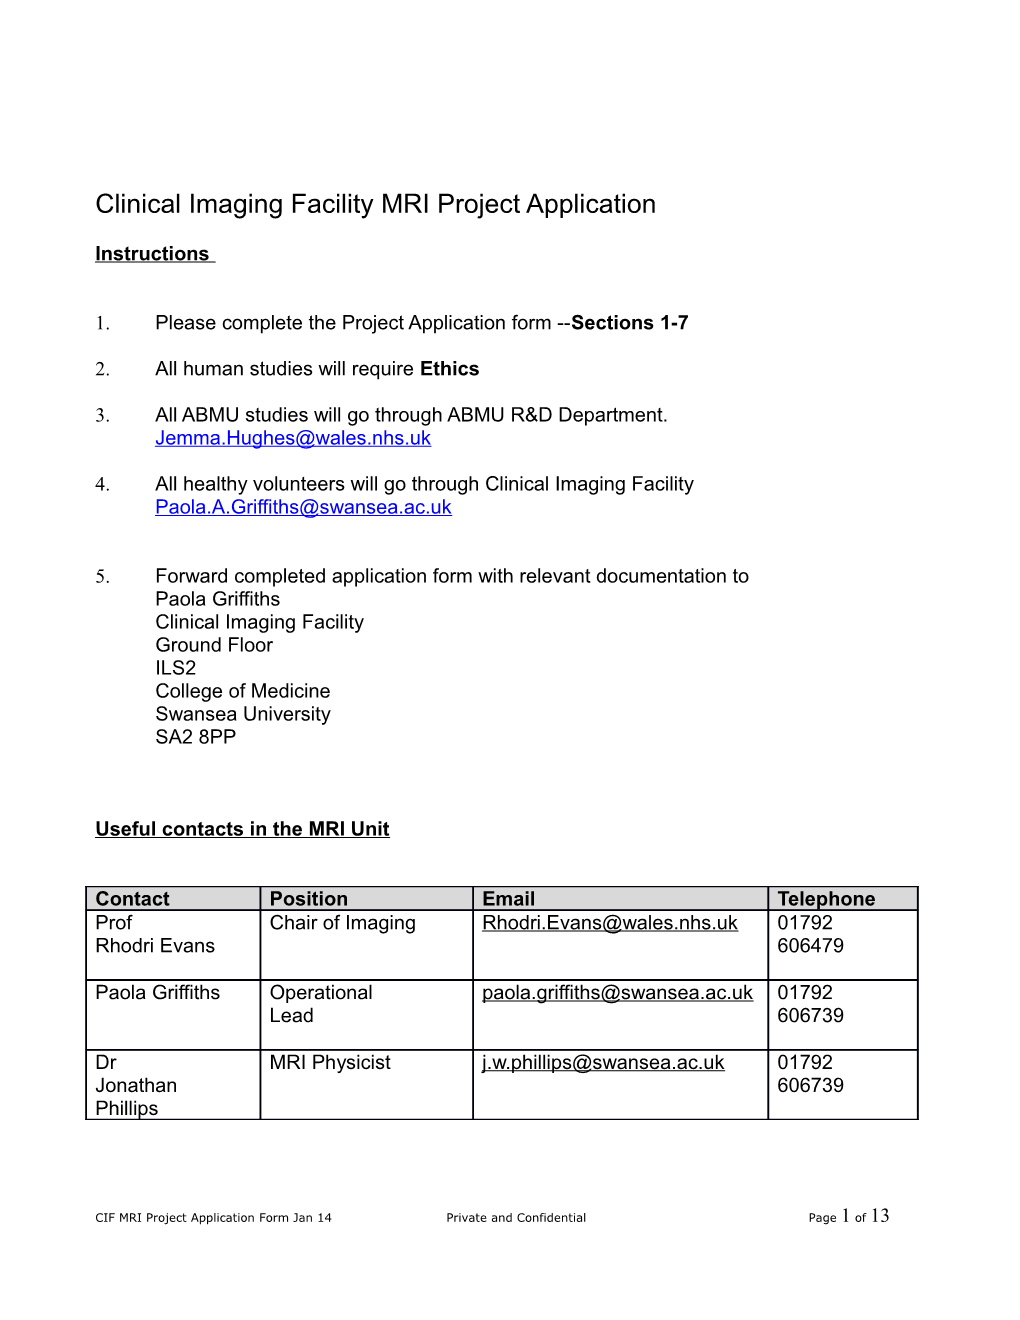 Clinical Imaging Facility MRI Project Application